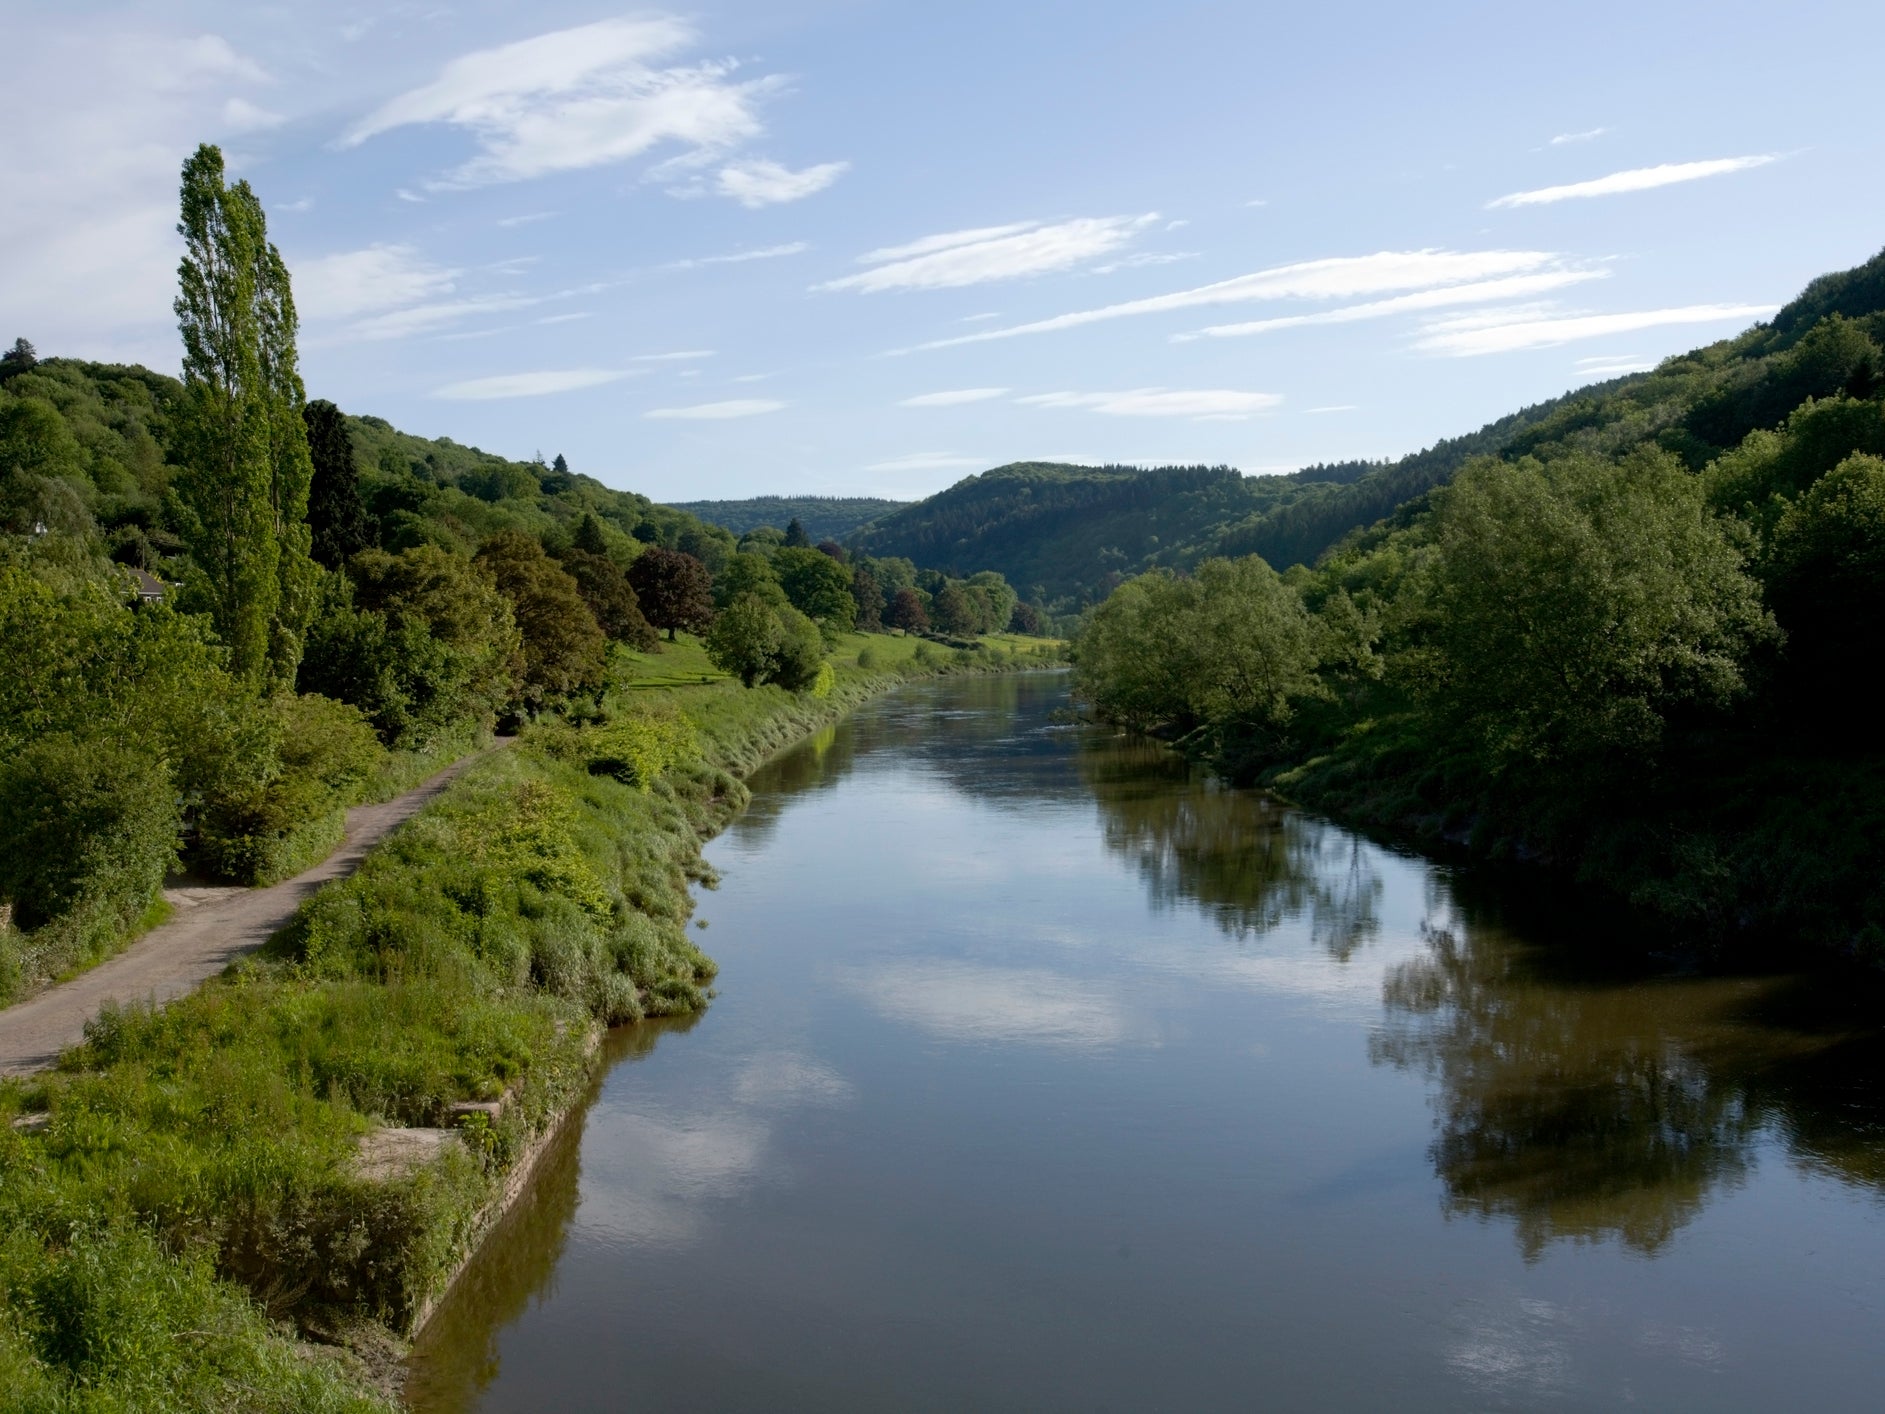 The River Wye on the border between Wales and England is among the rivers where water quality has declined in recent years, despite being in a designated Area of Outstanding Natural Beauty